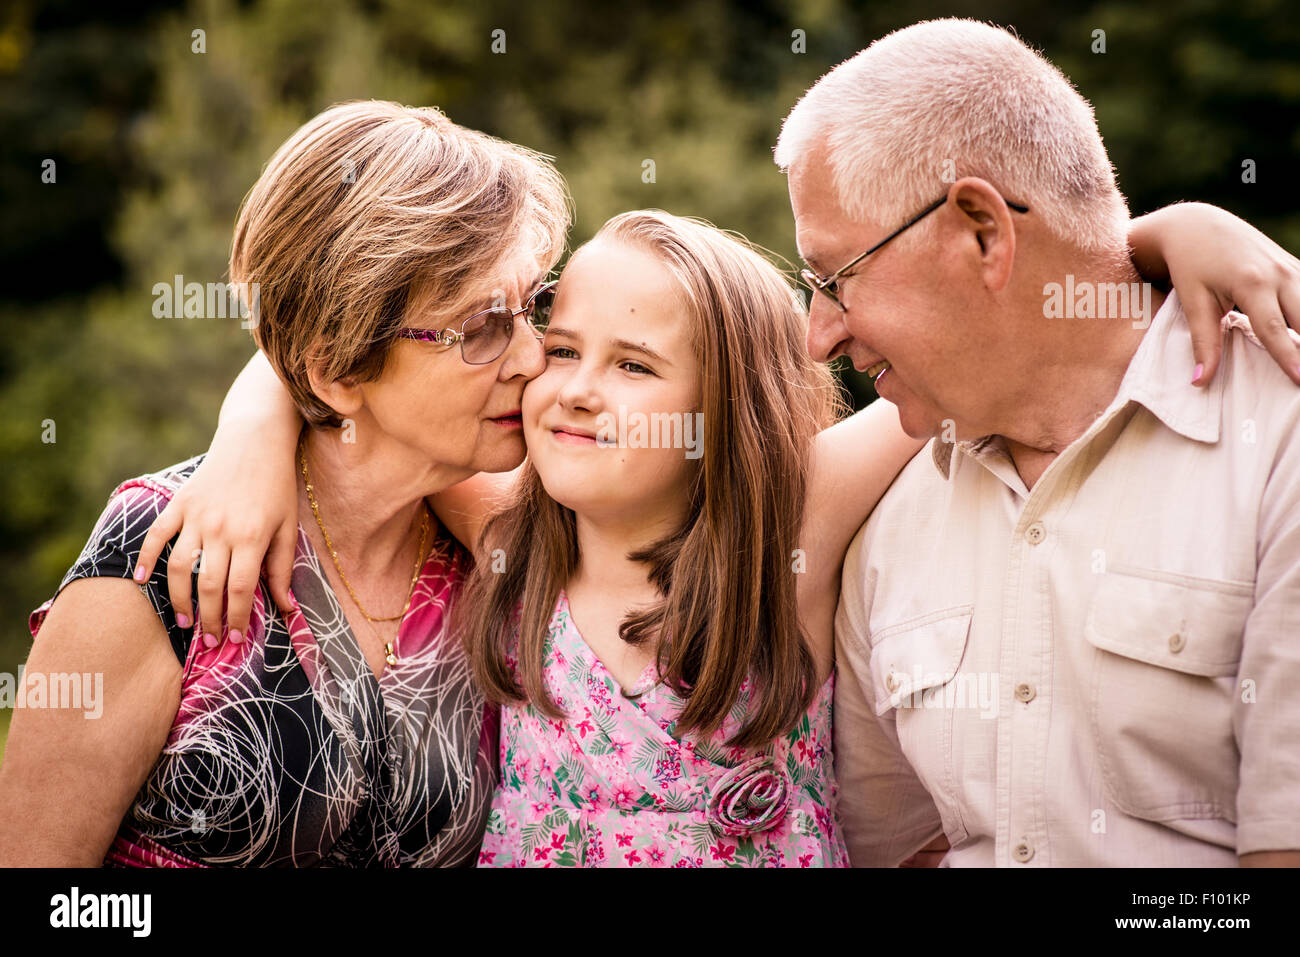 Child embracing her happy grandparents - outdoors in nature Stock Photo